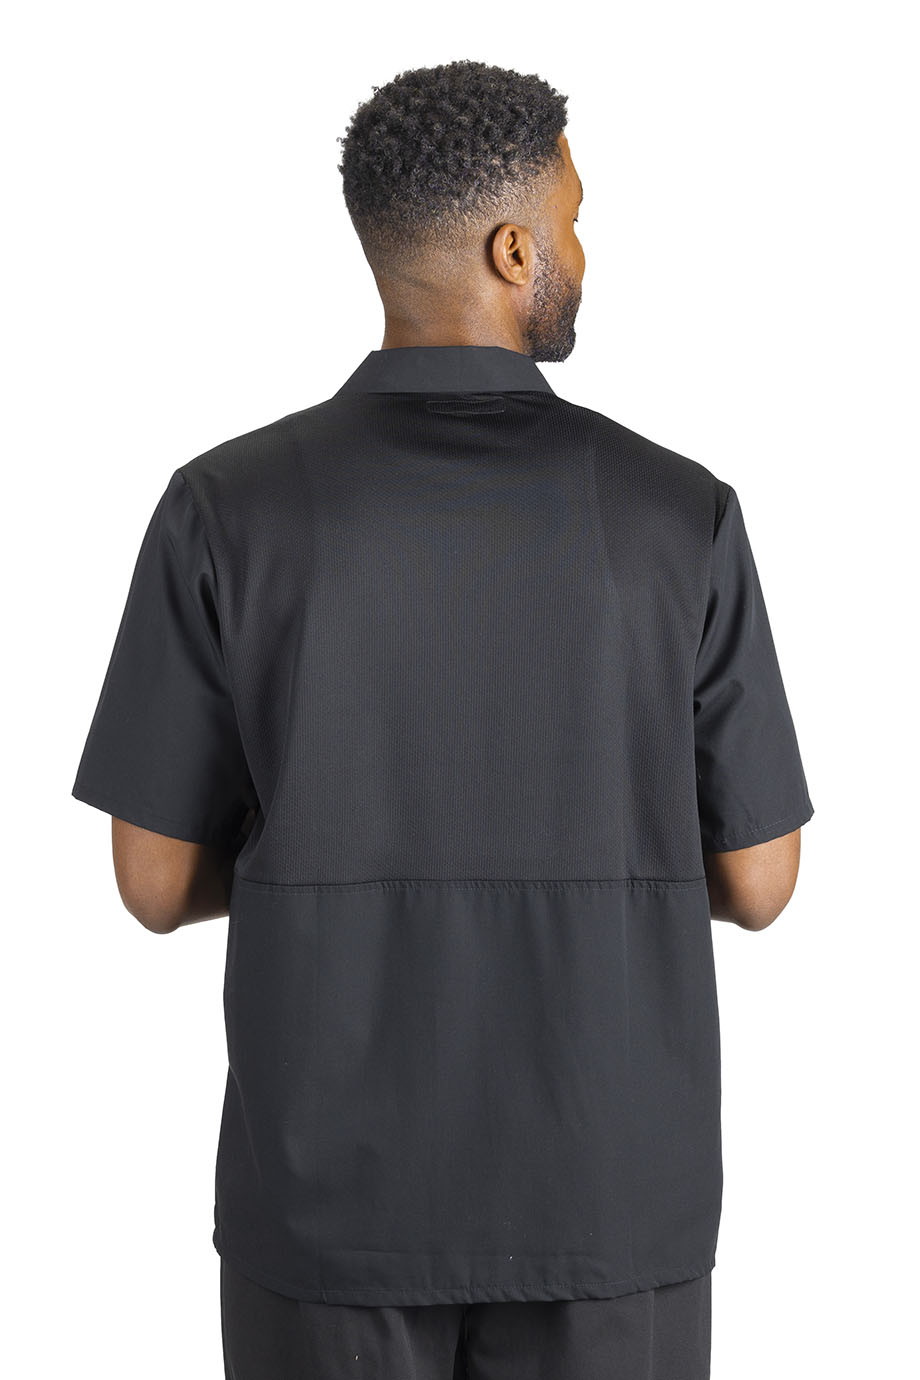 COOK SHIRT WITH MESH BACK